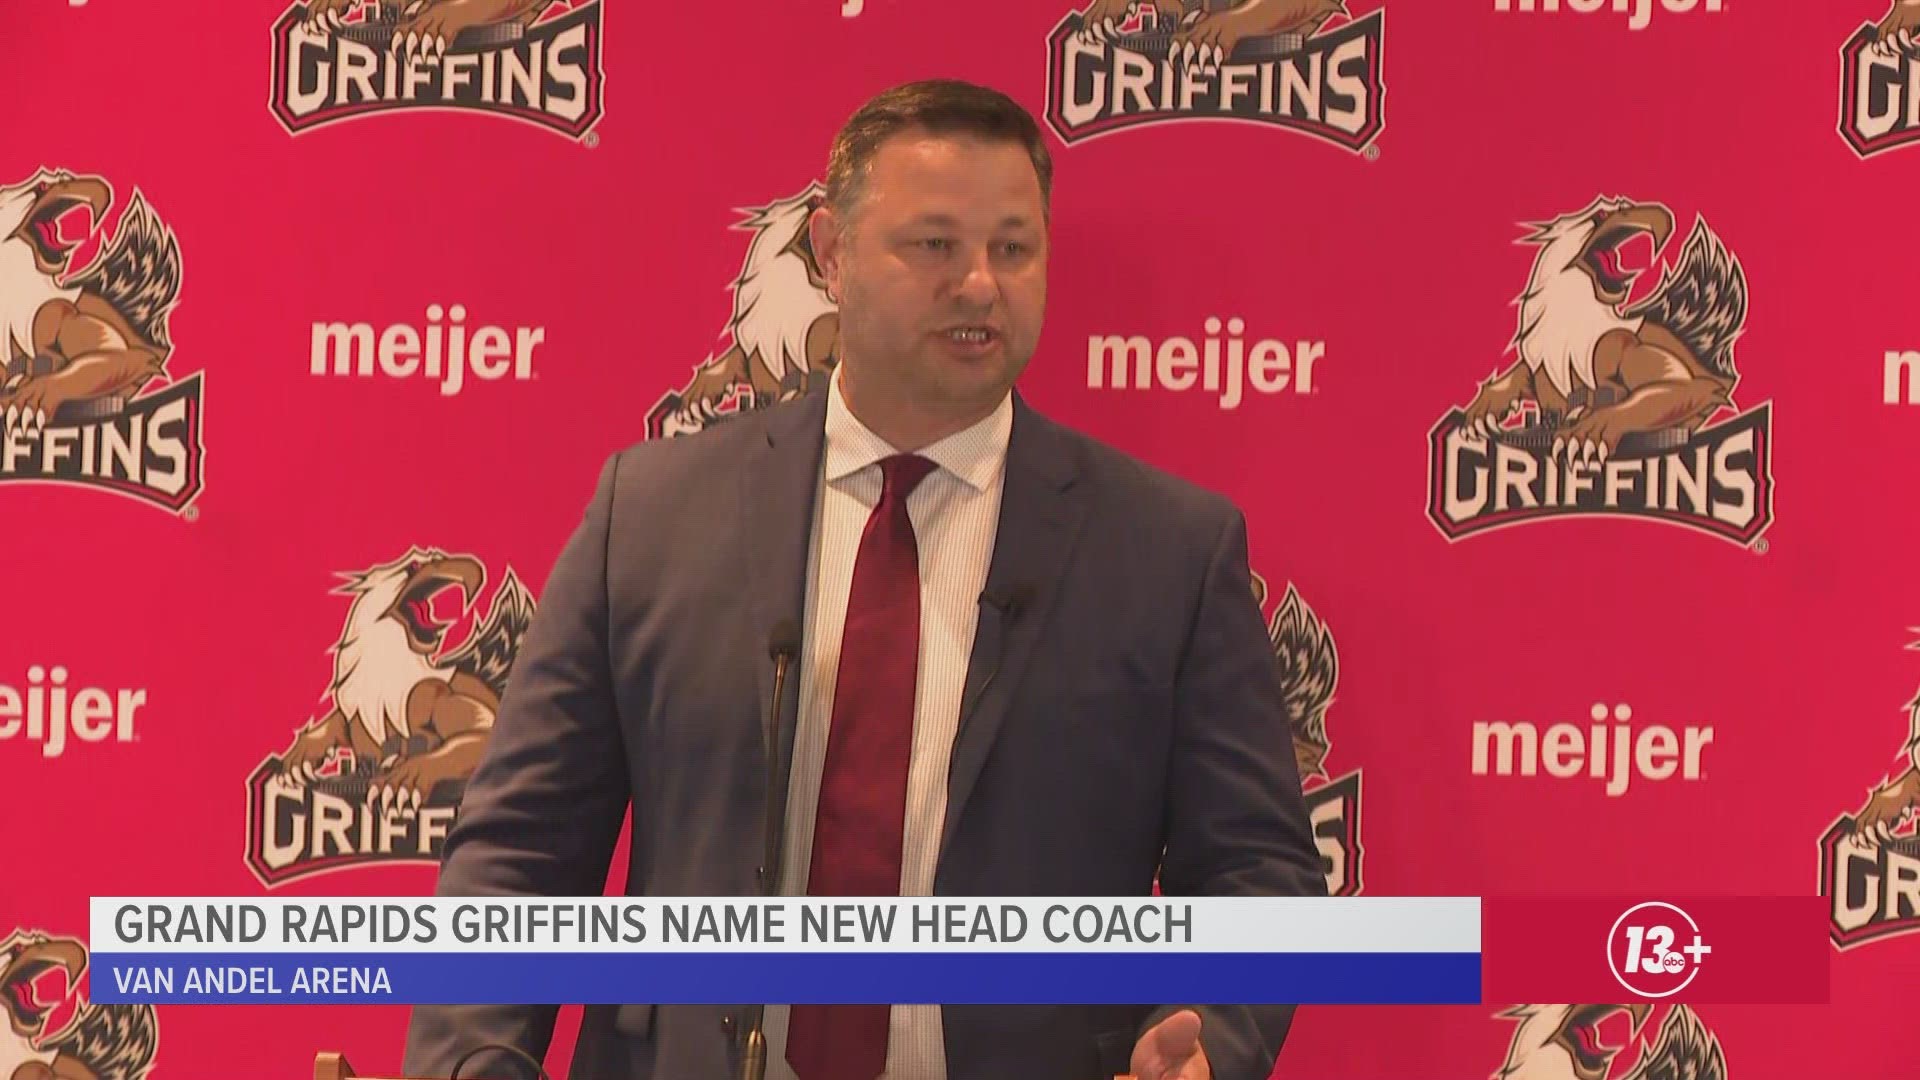 Watson named next head coach of Grand Rapids Griffins